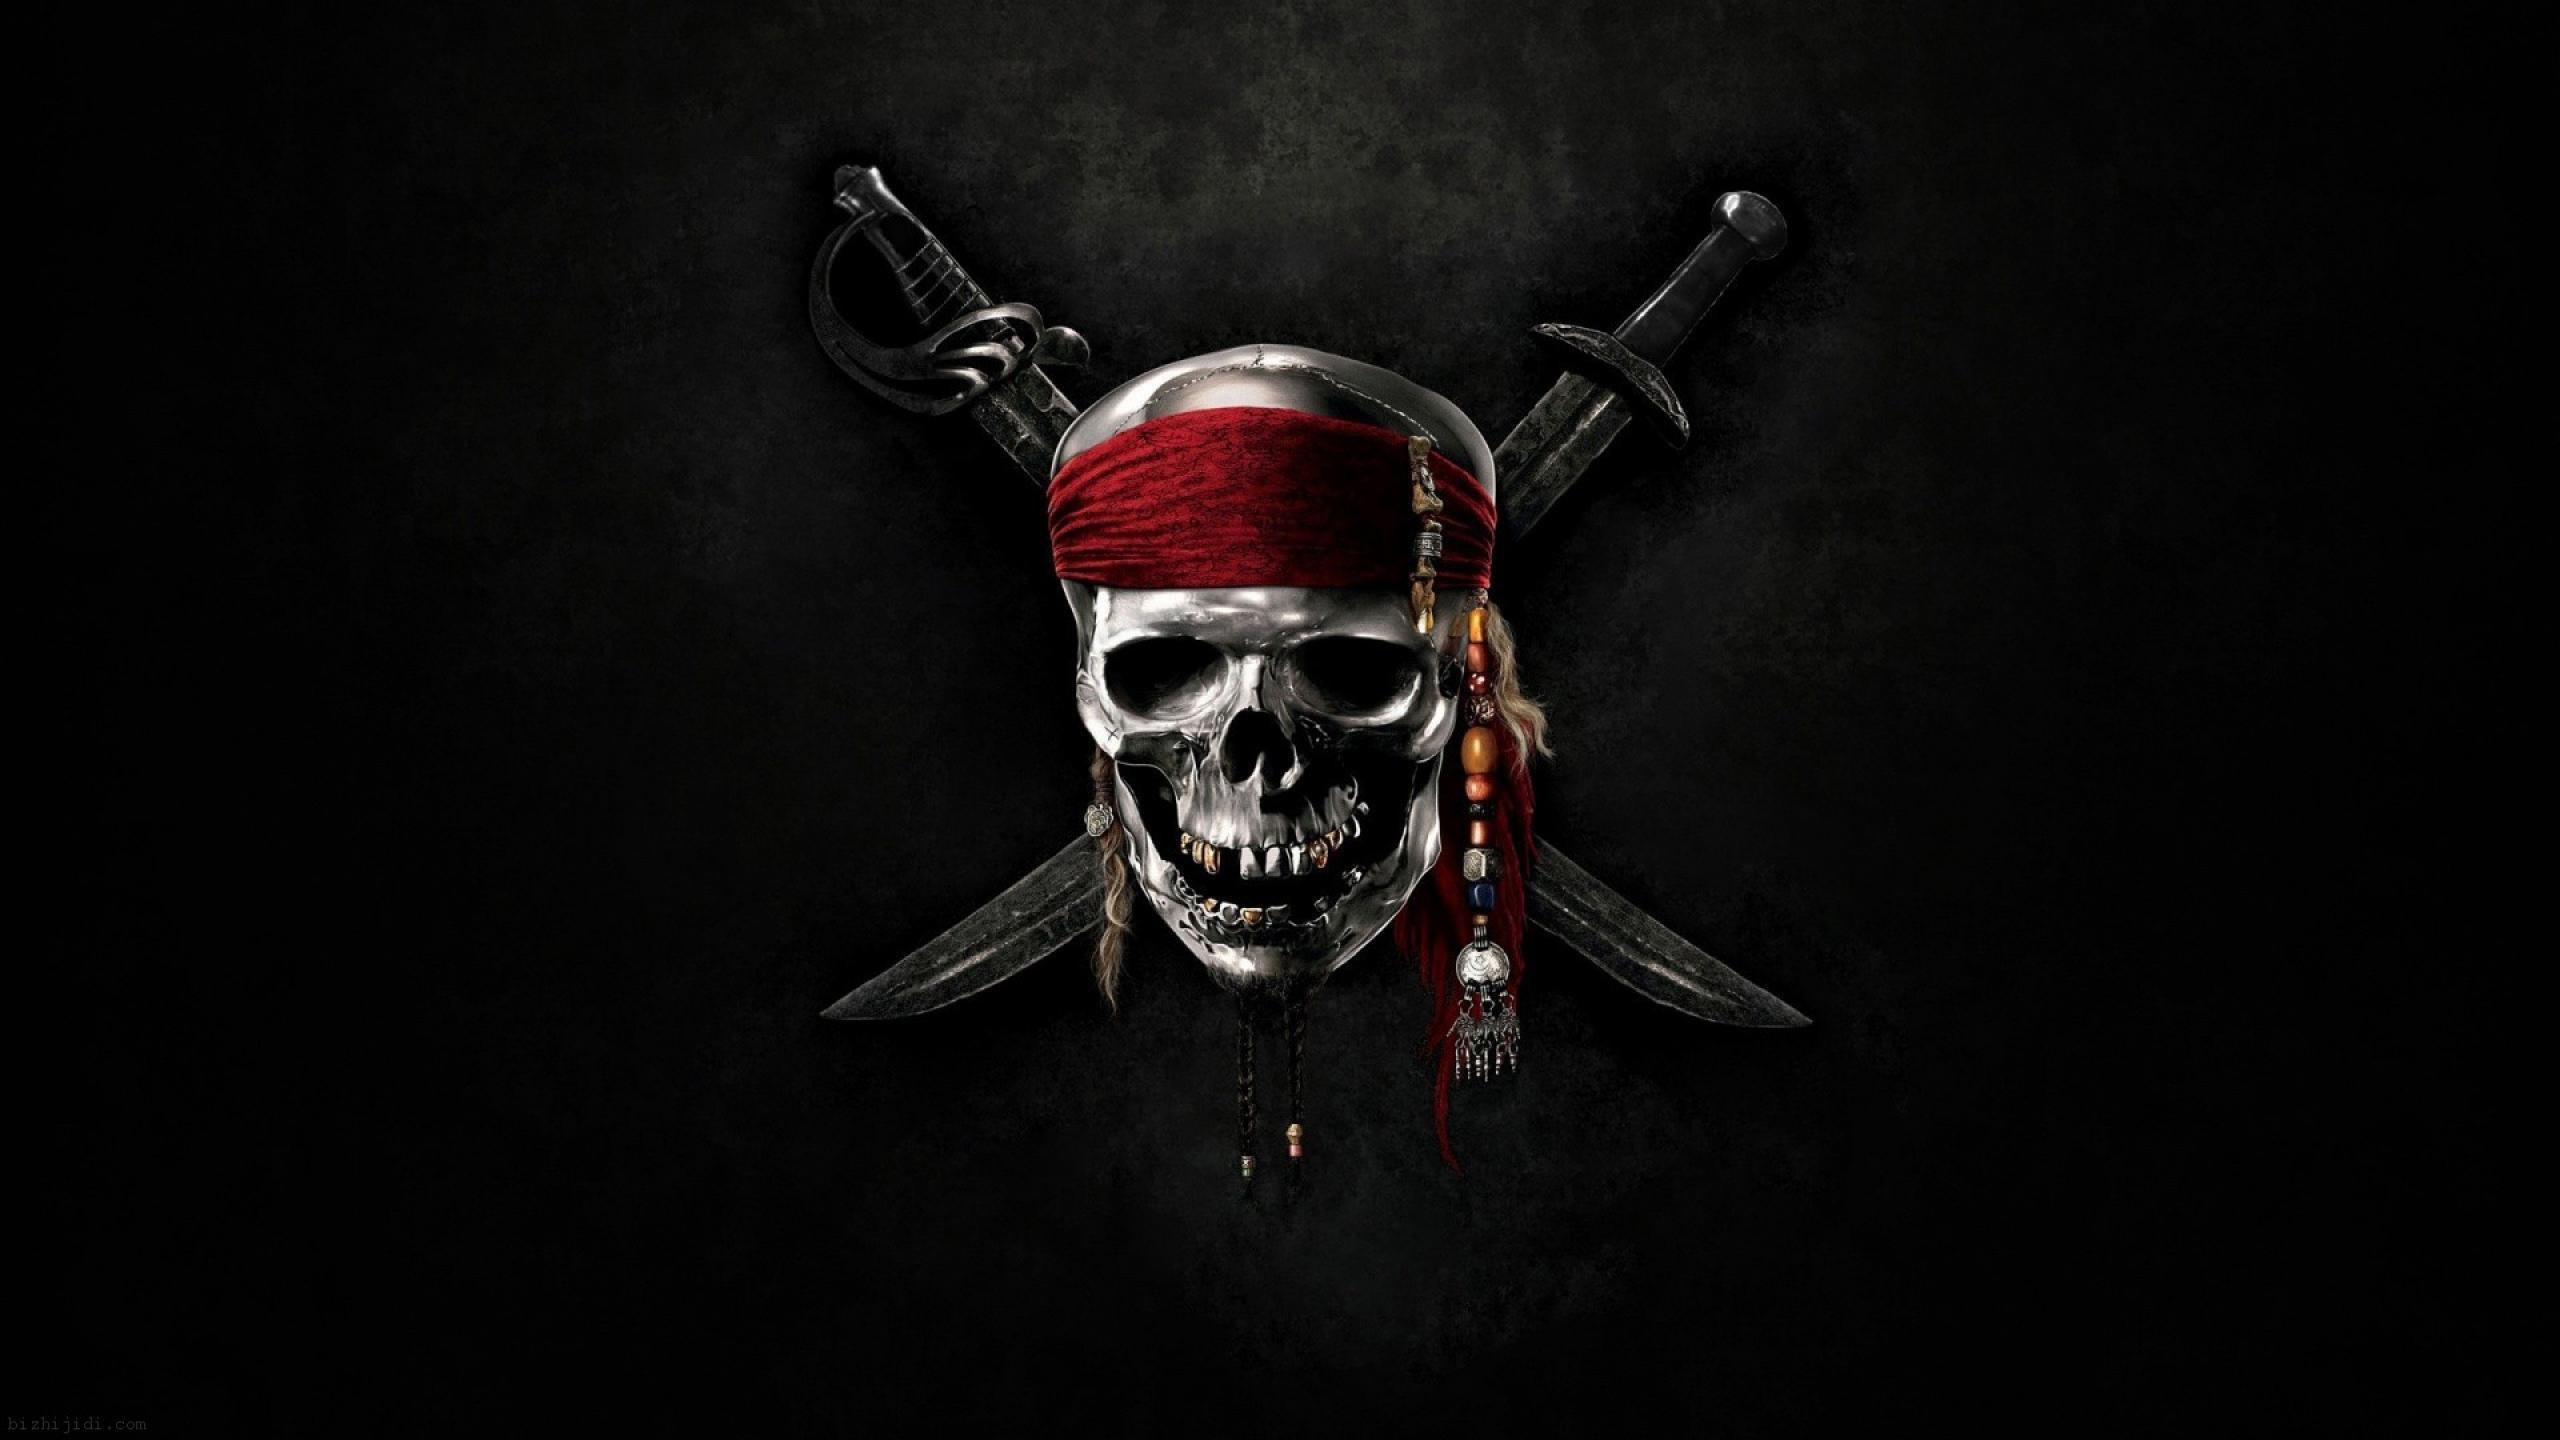 Cool Skull Wallpaper For Mobile Image Amp Pictures Becuo